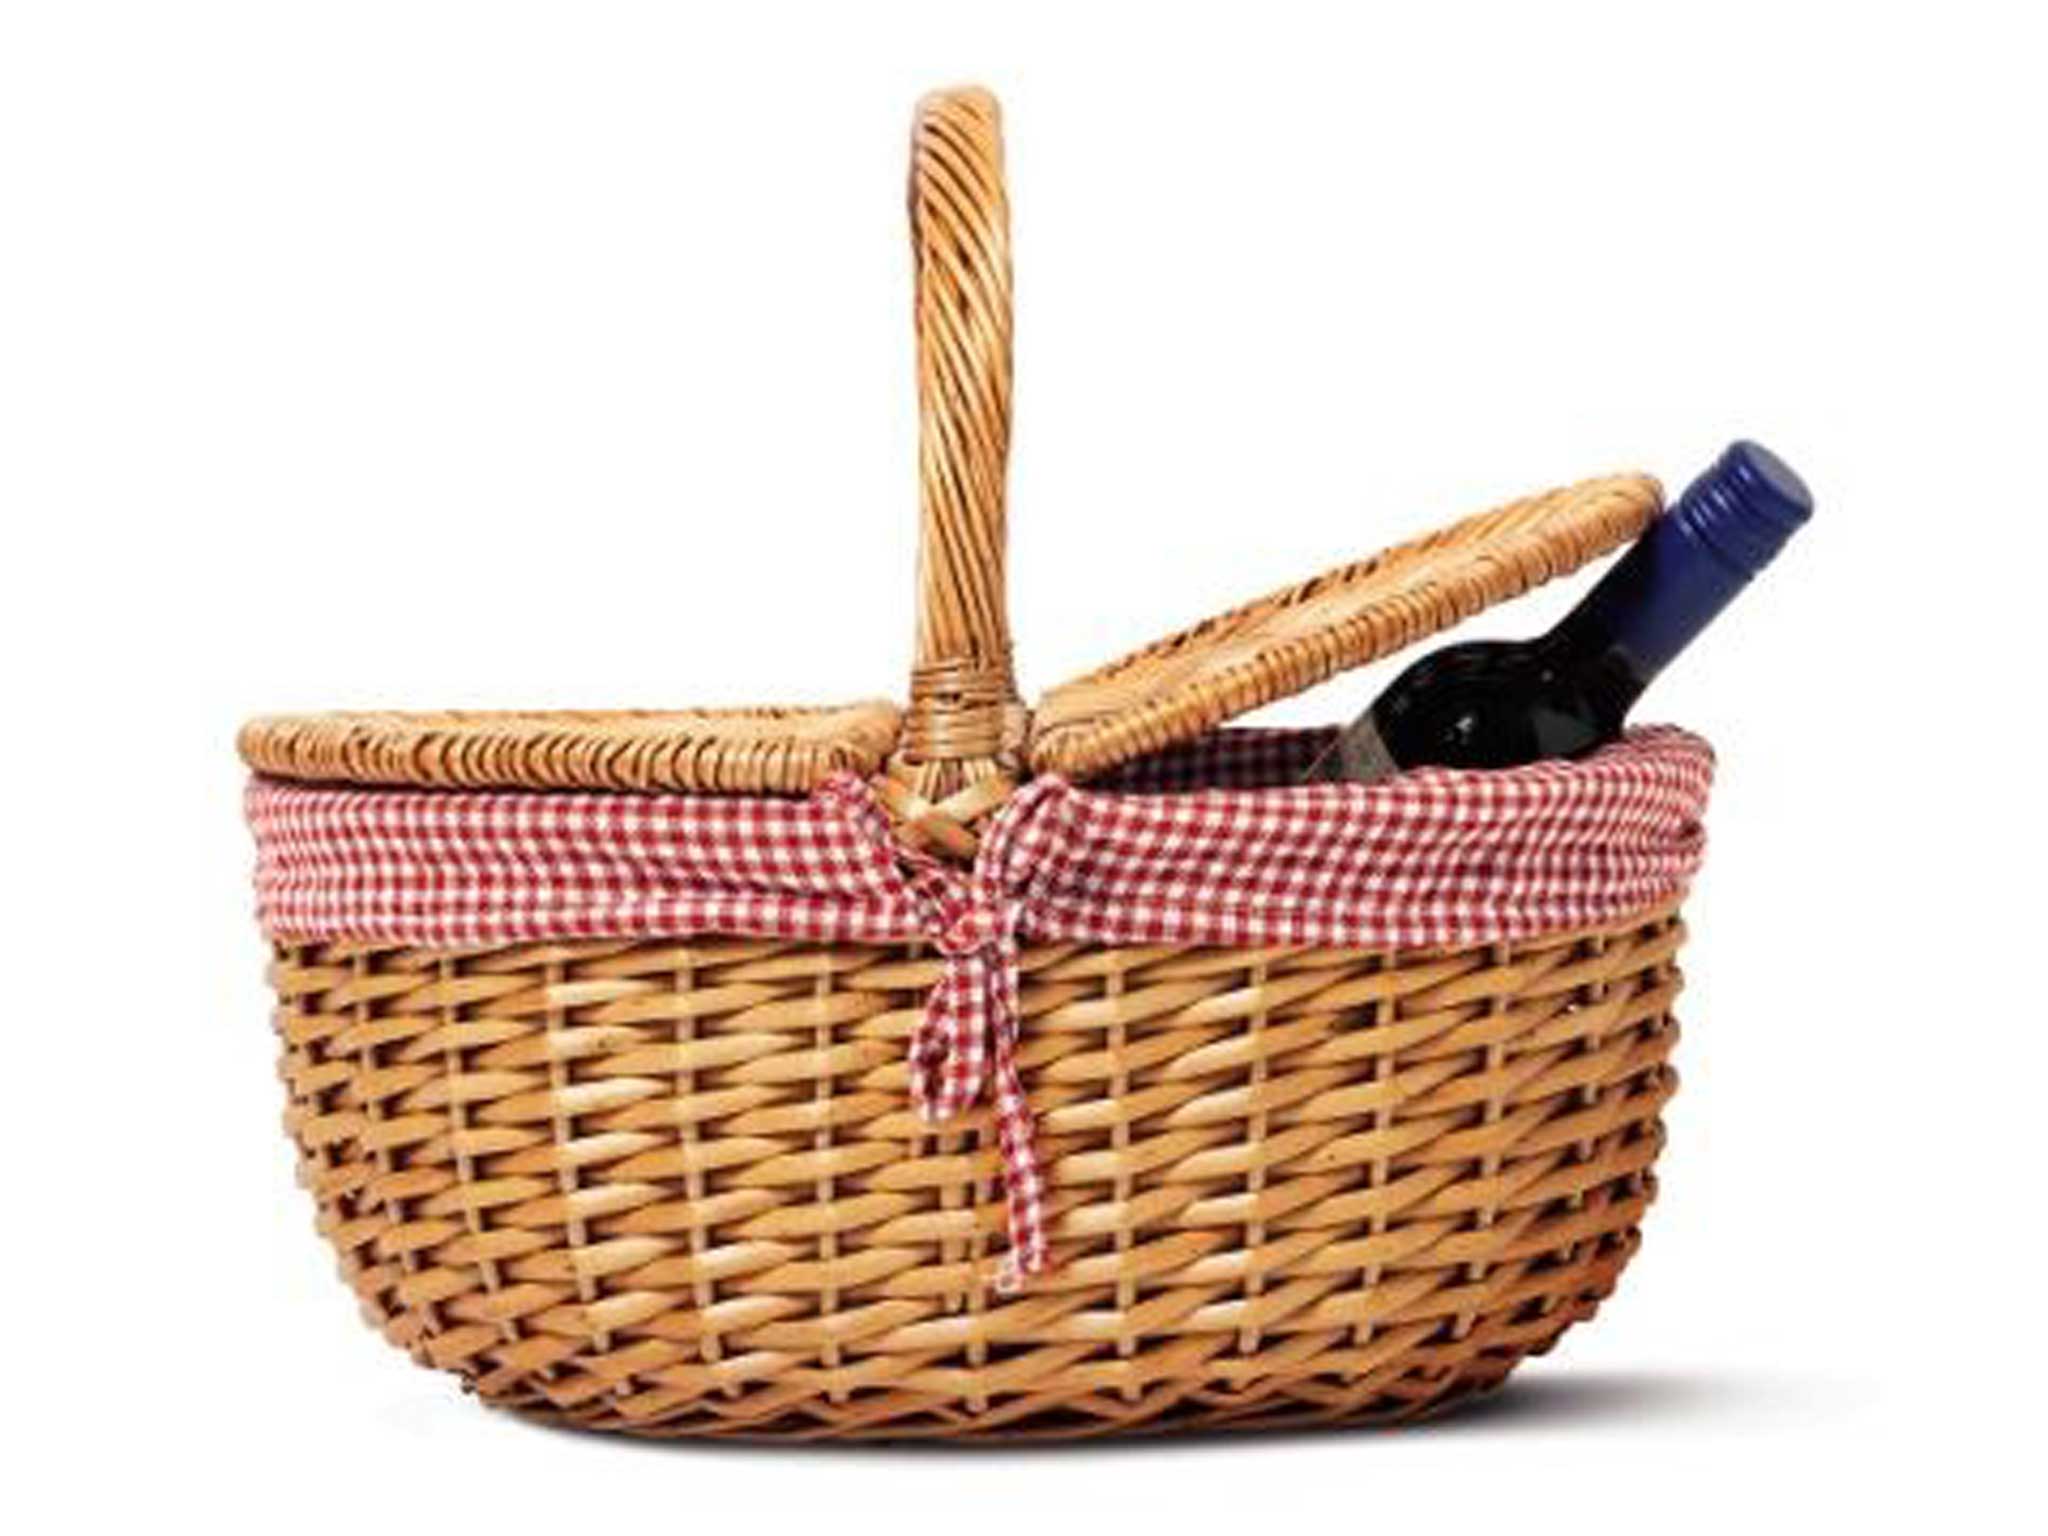 10 best picnic bags and baskets - Food & Drink - IndyBest - The Independent